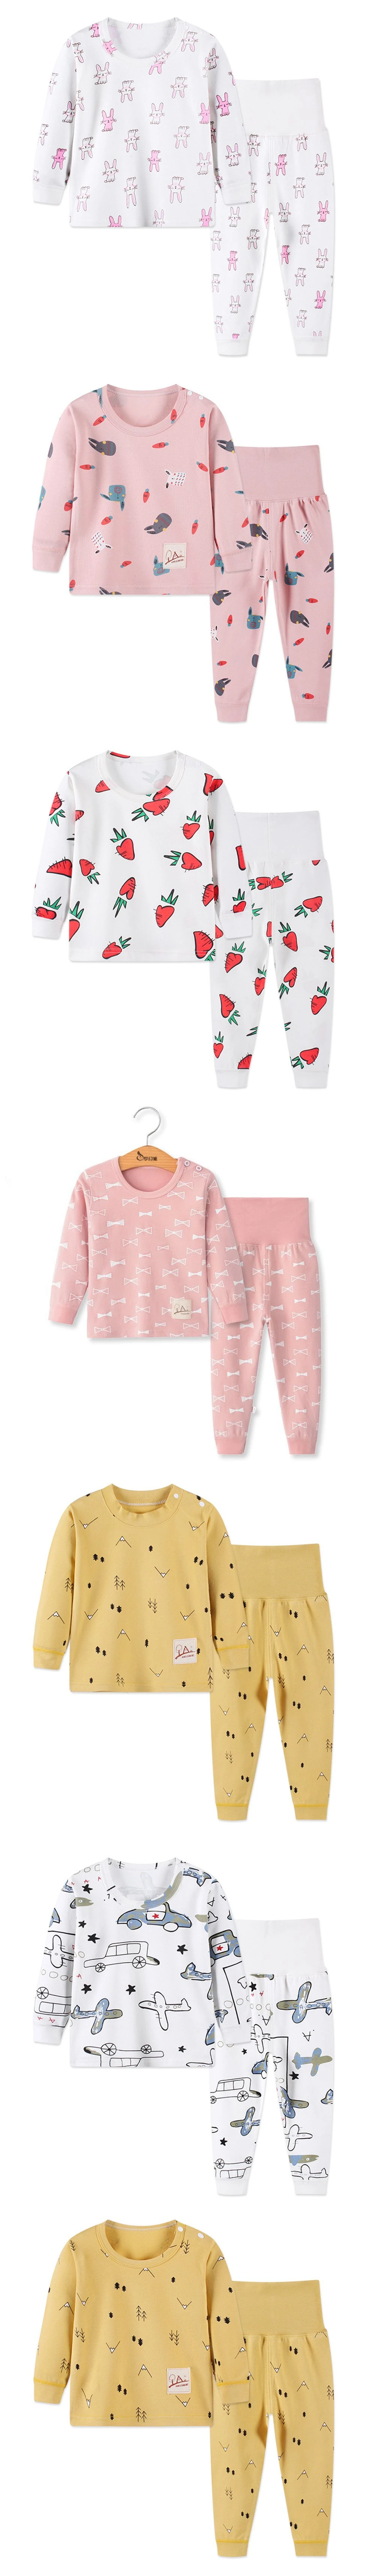 Essentials Baby Long-Sleeve Tight-Fit 2-Piece Pajama Set